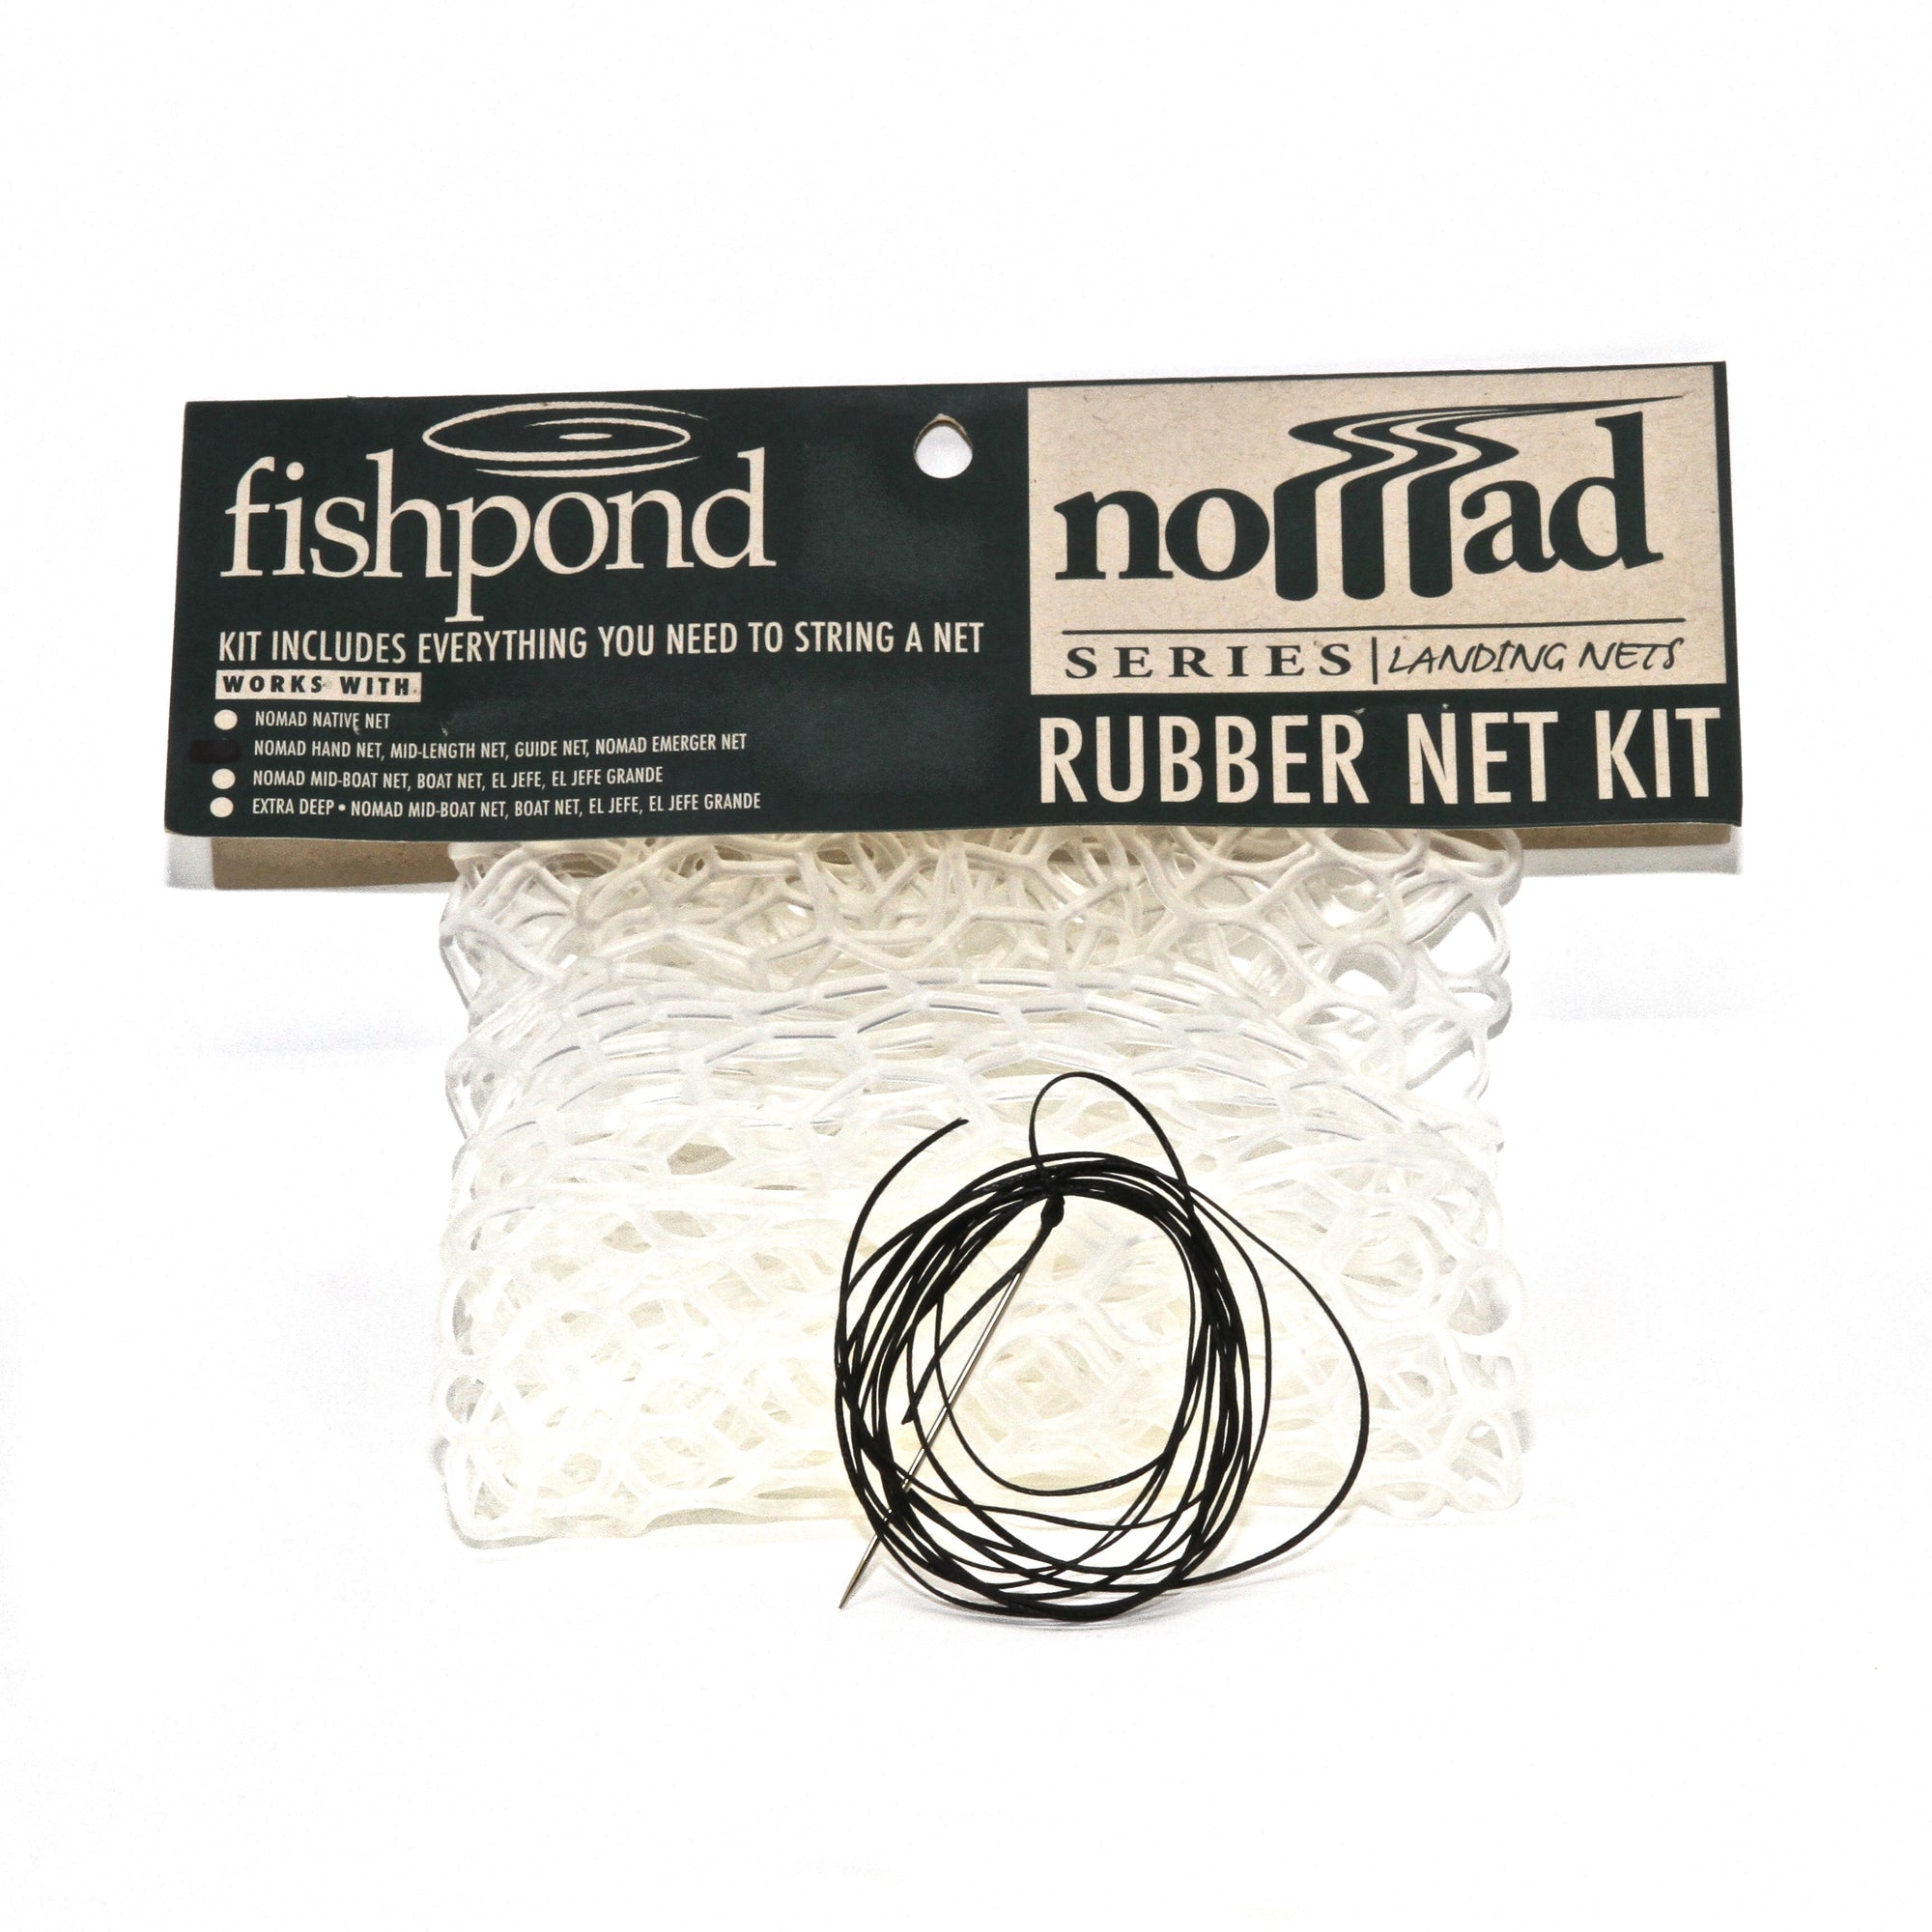 Ghost landing net bags and black rubber landing net bags. - Nets that Honor  the Fish